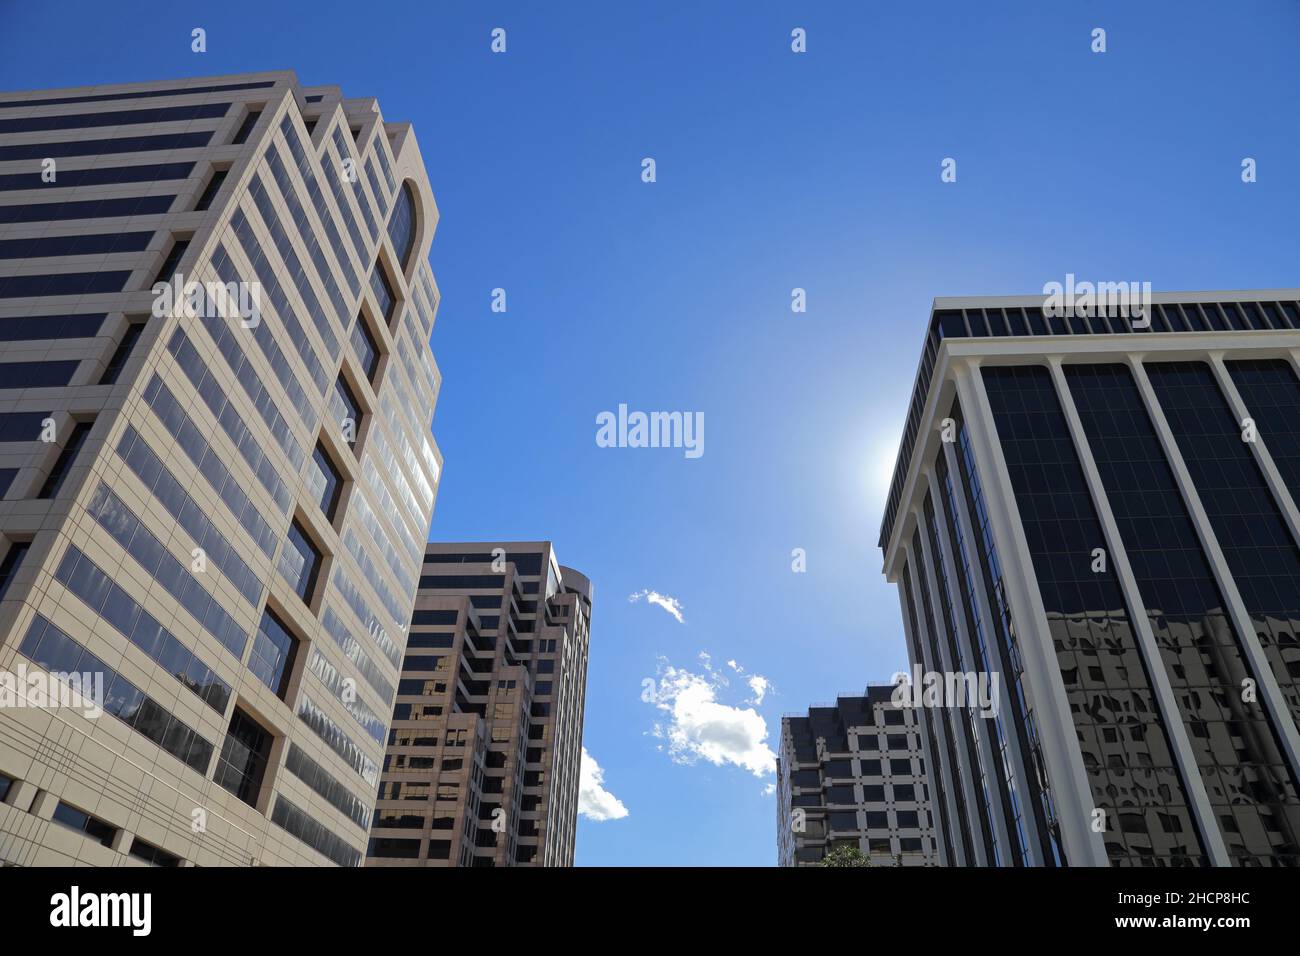 Tall business buildings are shown from a street level view during the day. Stock Photo